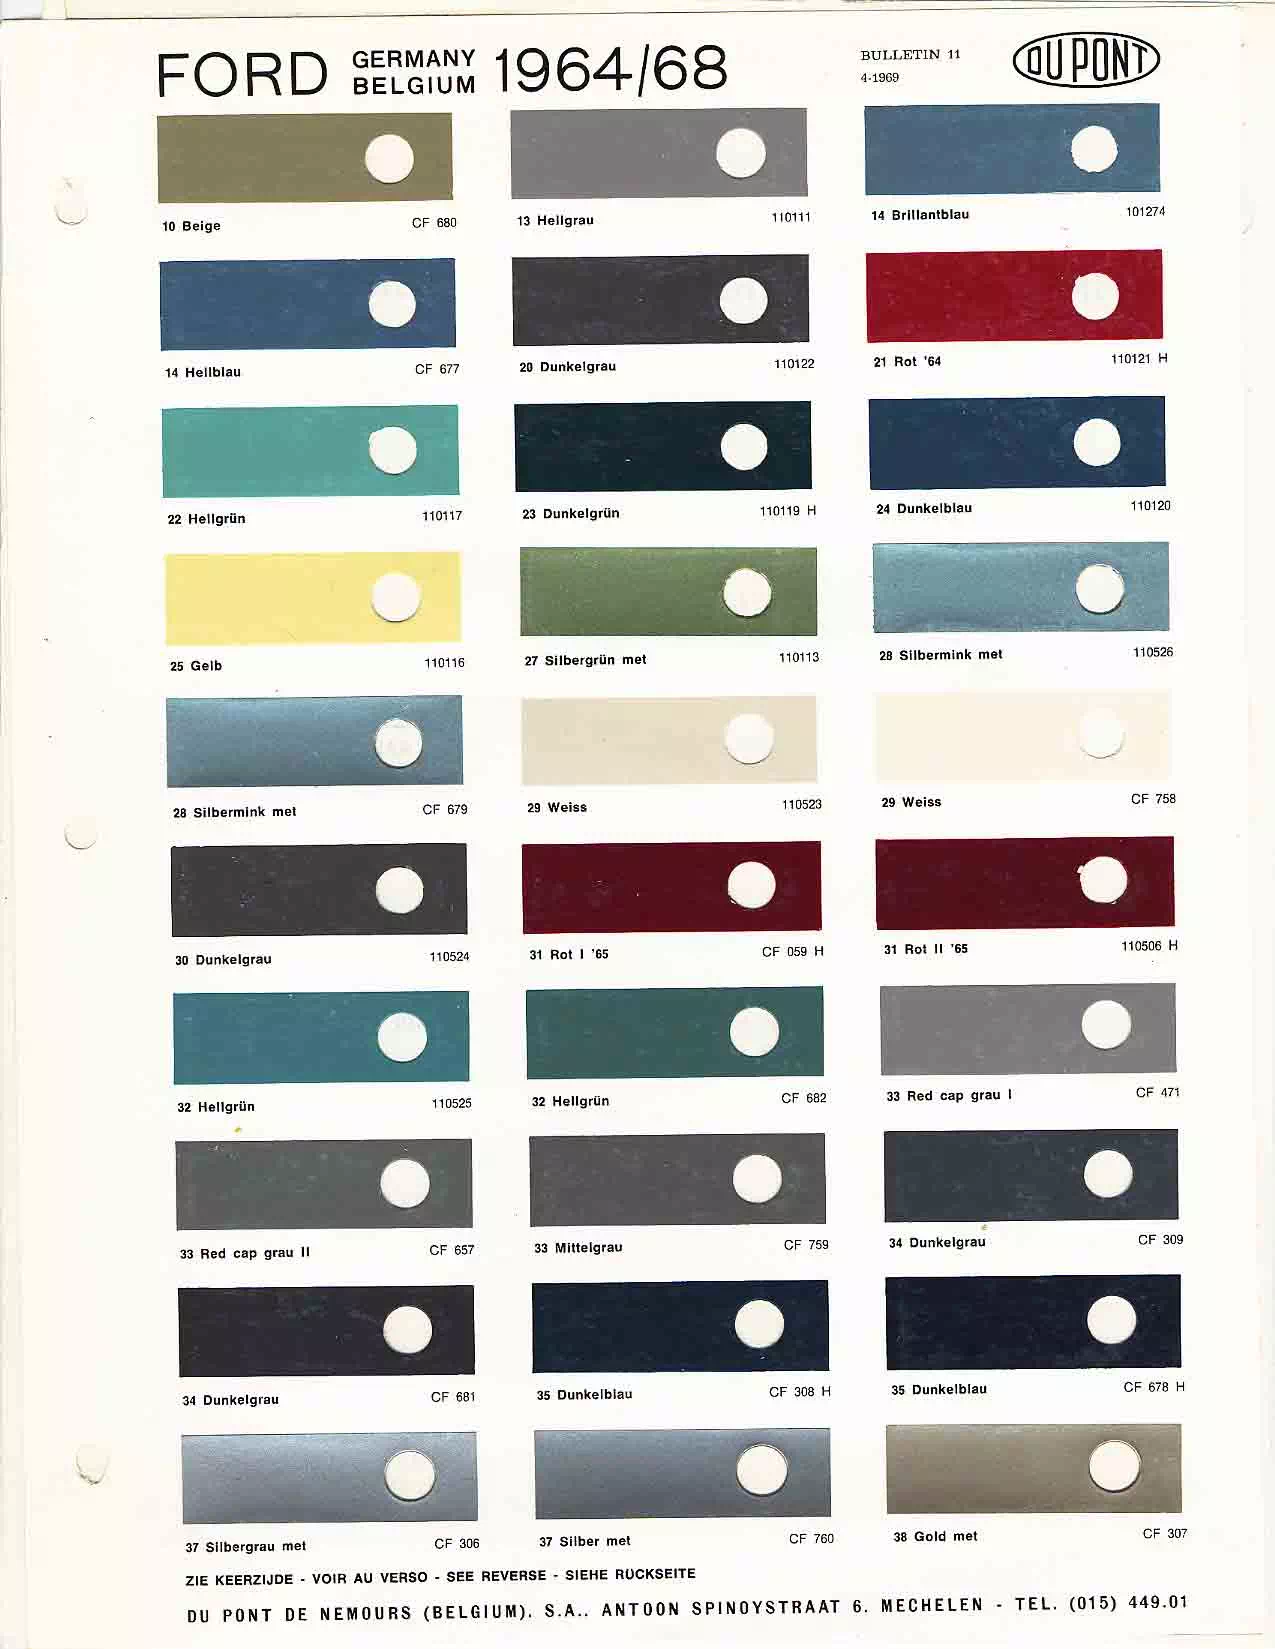 Color examples, Ordering Codes, OEM Paint Code, Color Swatches, and Color Names for the Ford Motor Company in 1964